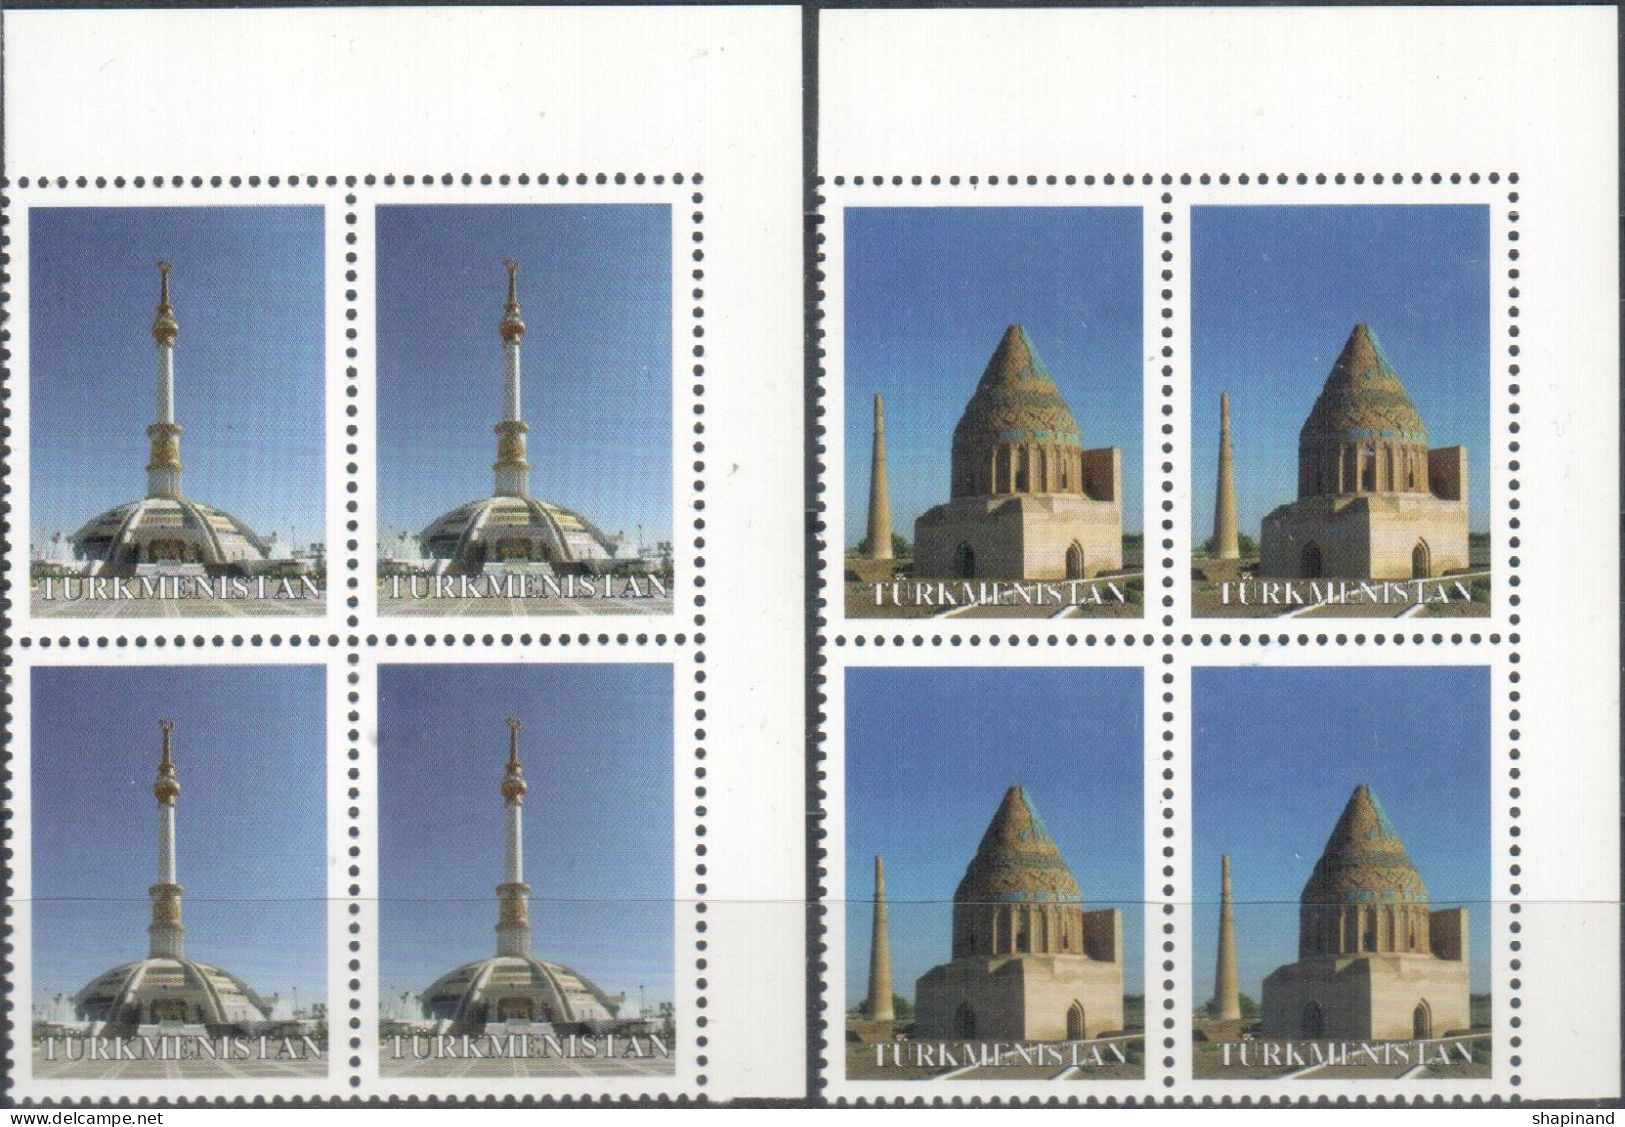 Turkmenistan 2014 "Architecture Of Ashgabat" (A Very Rare Stamps Without A Face Value) 2 Bl Of 4v Quality100% - Turkménistan